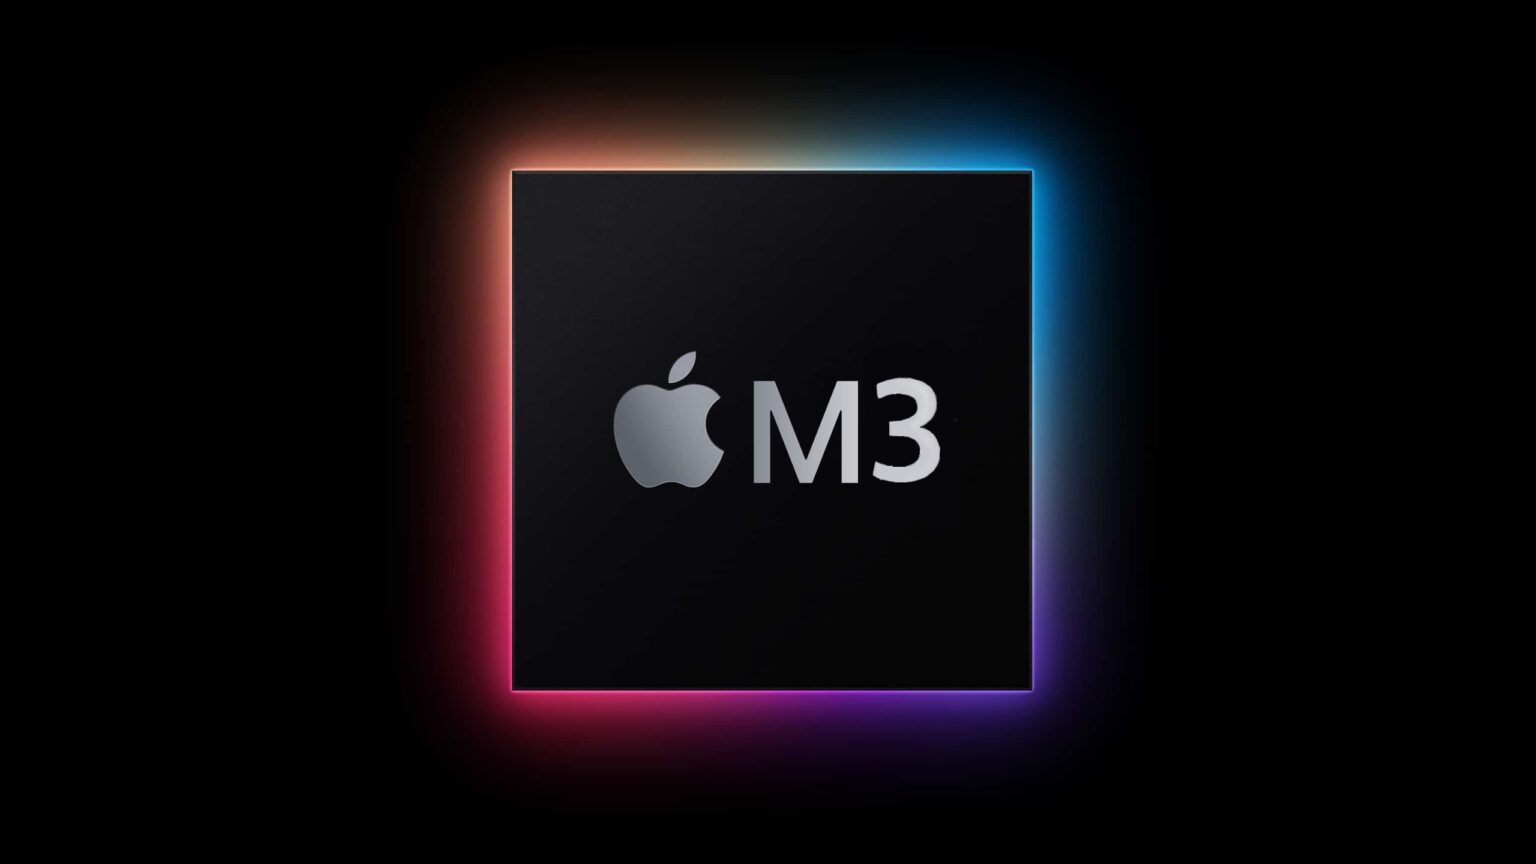 In early benchmark testing, Apple's new M3 chip lives up to expectations for speed.